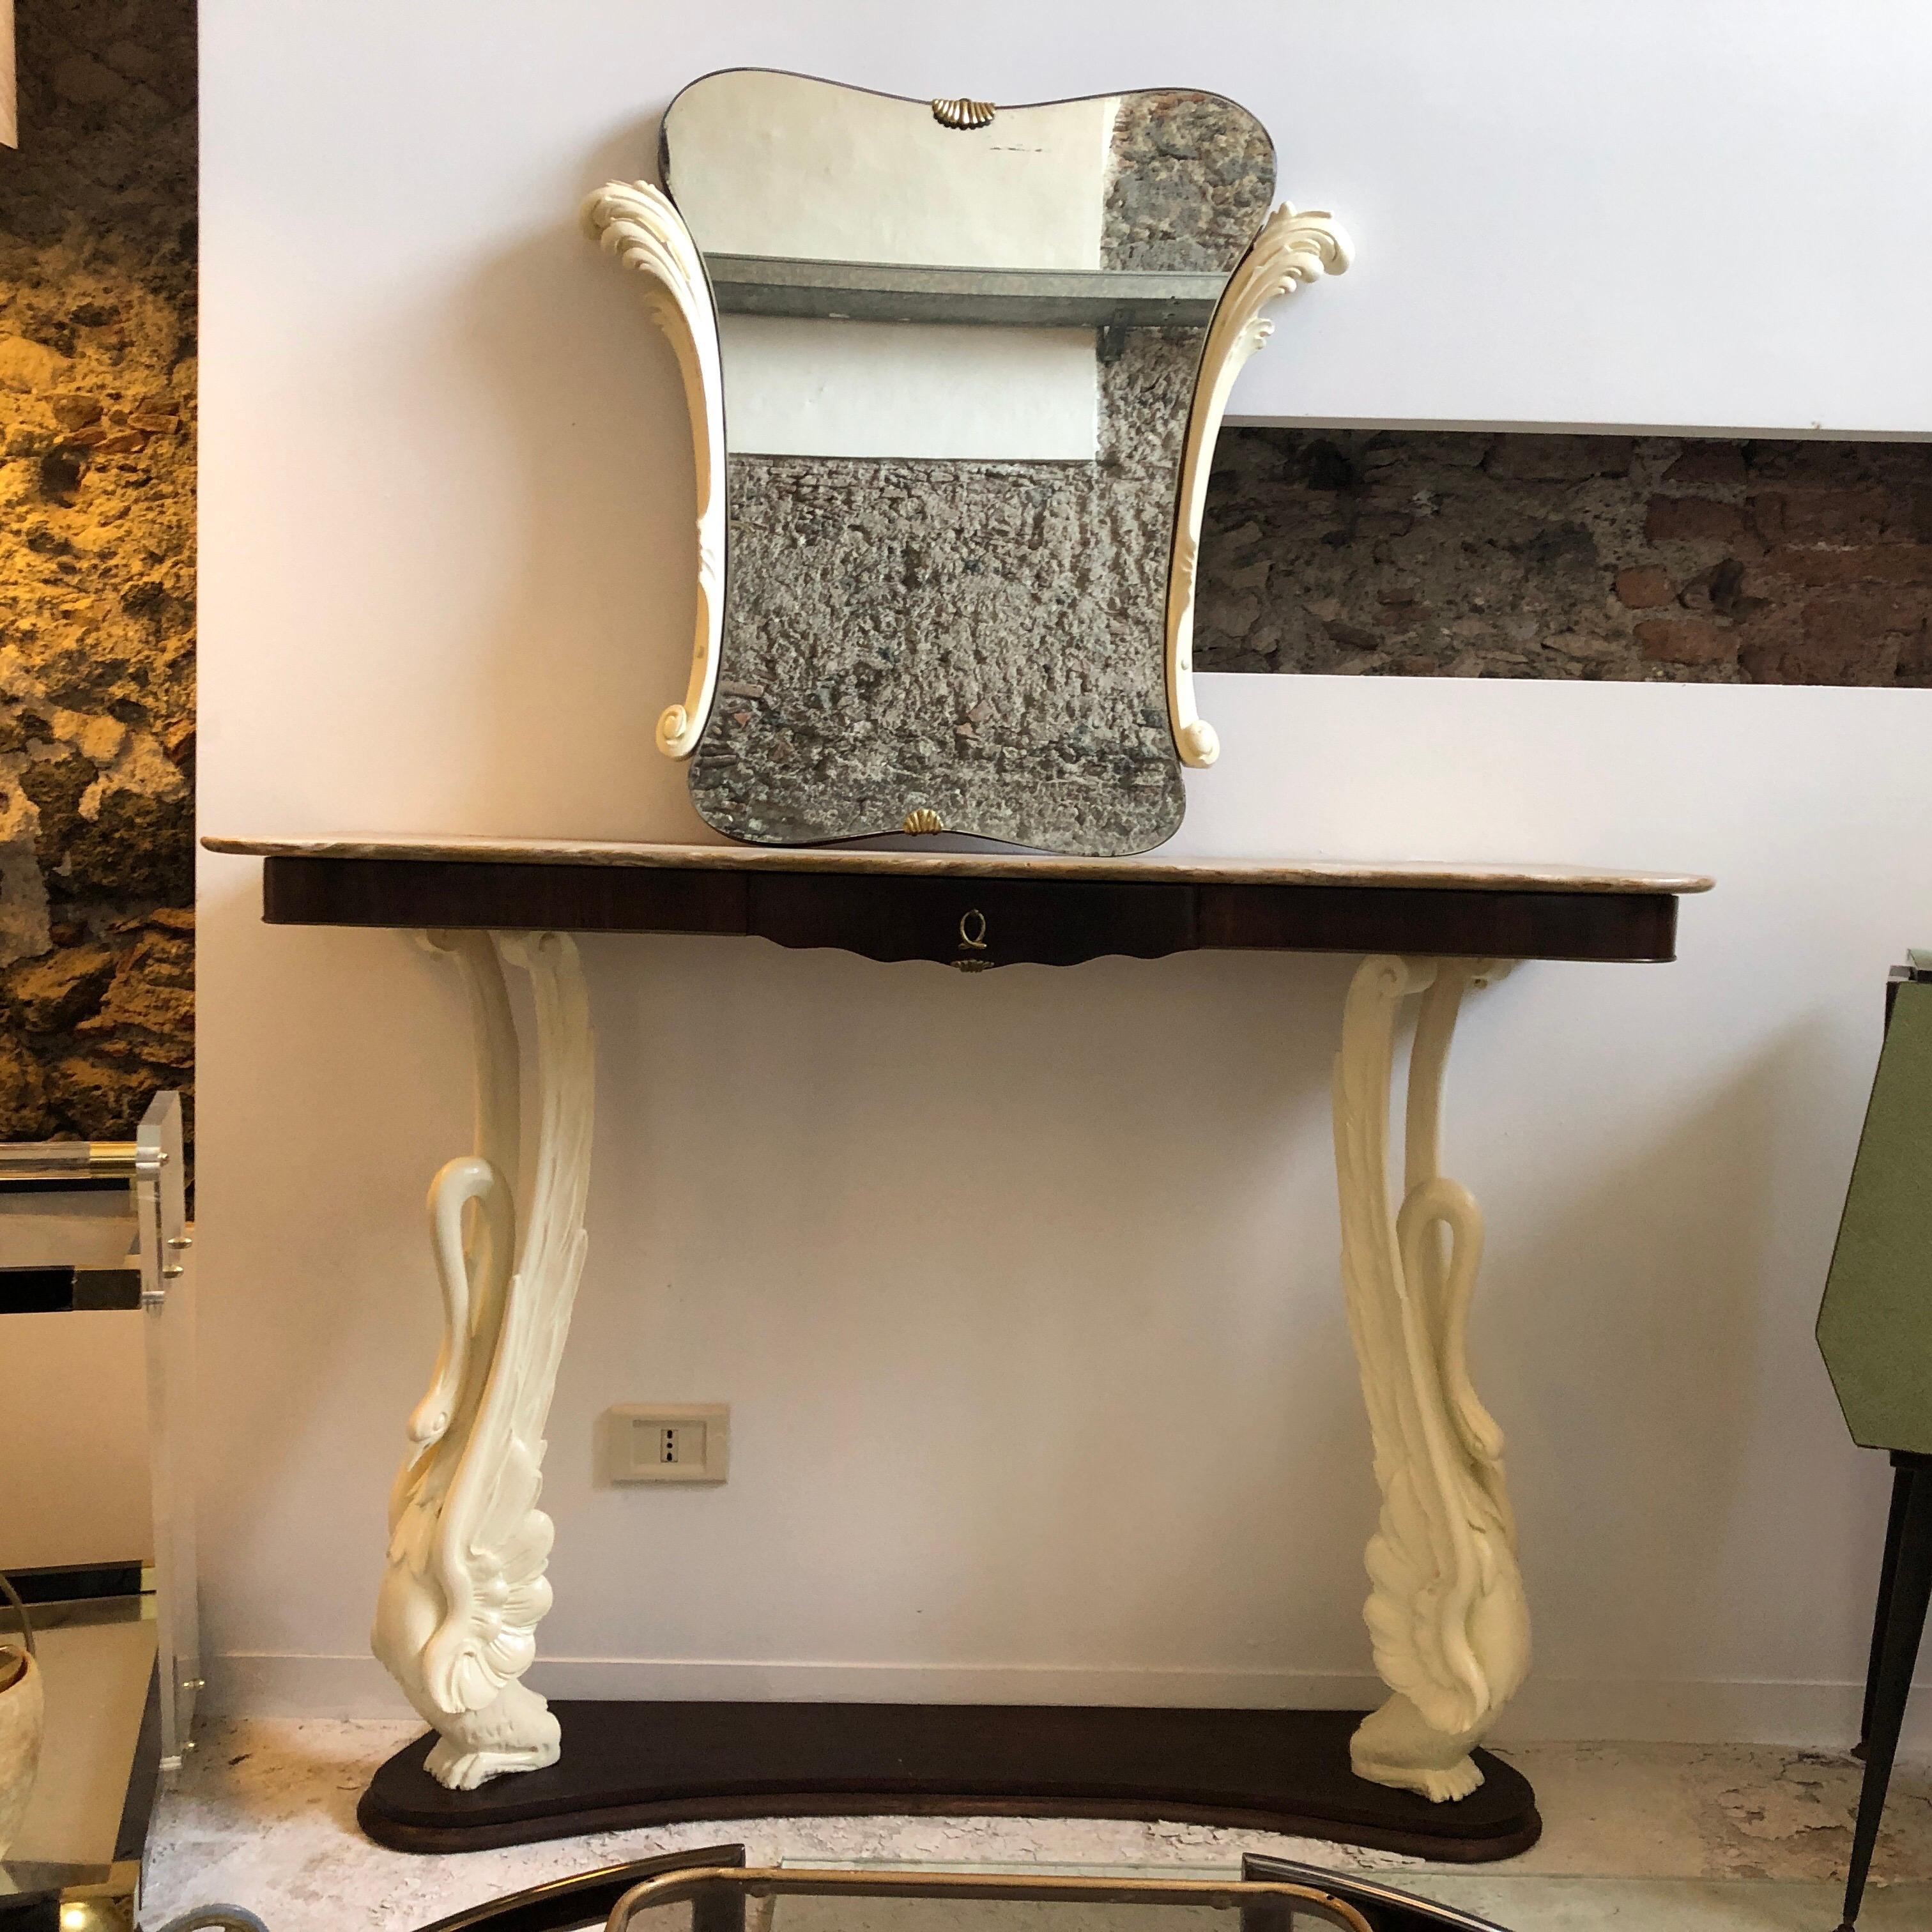 An Italian console with mirror made in the 1950s, two white swans hold up the upper part surmounted by a marble. Mirror dimensions are cm 80 x 60.
Good conditions overall.